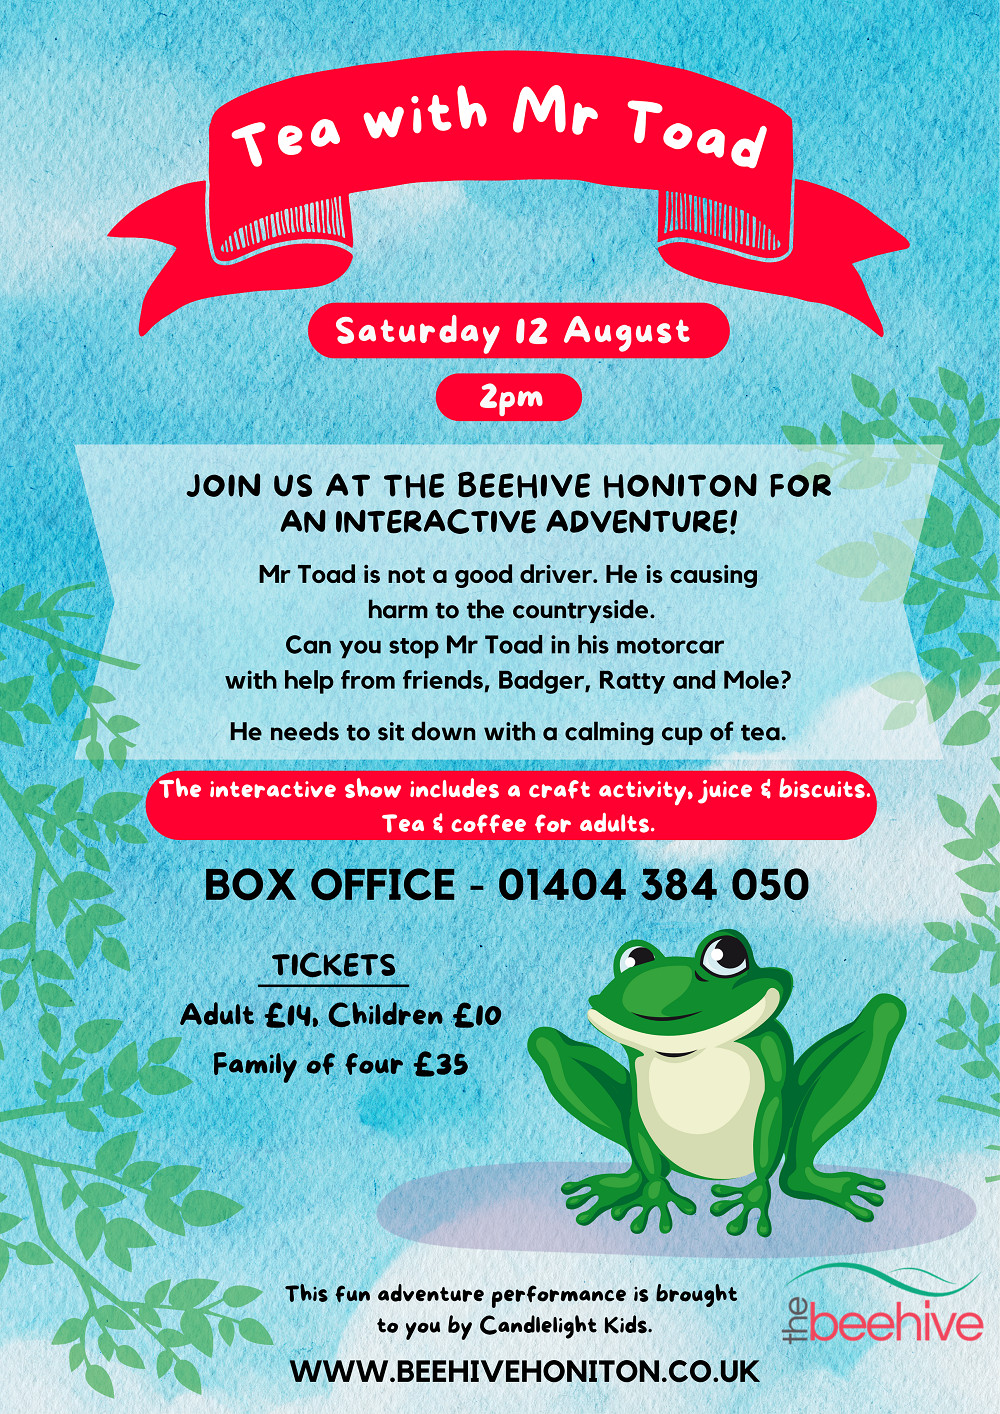 Tea With Mr Toad. An interactive activity!